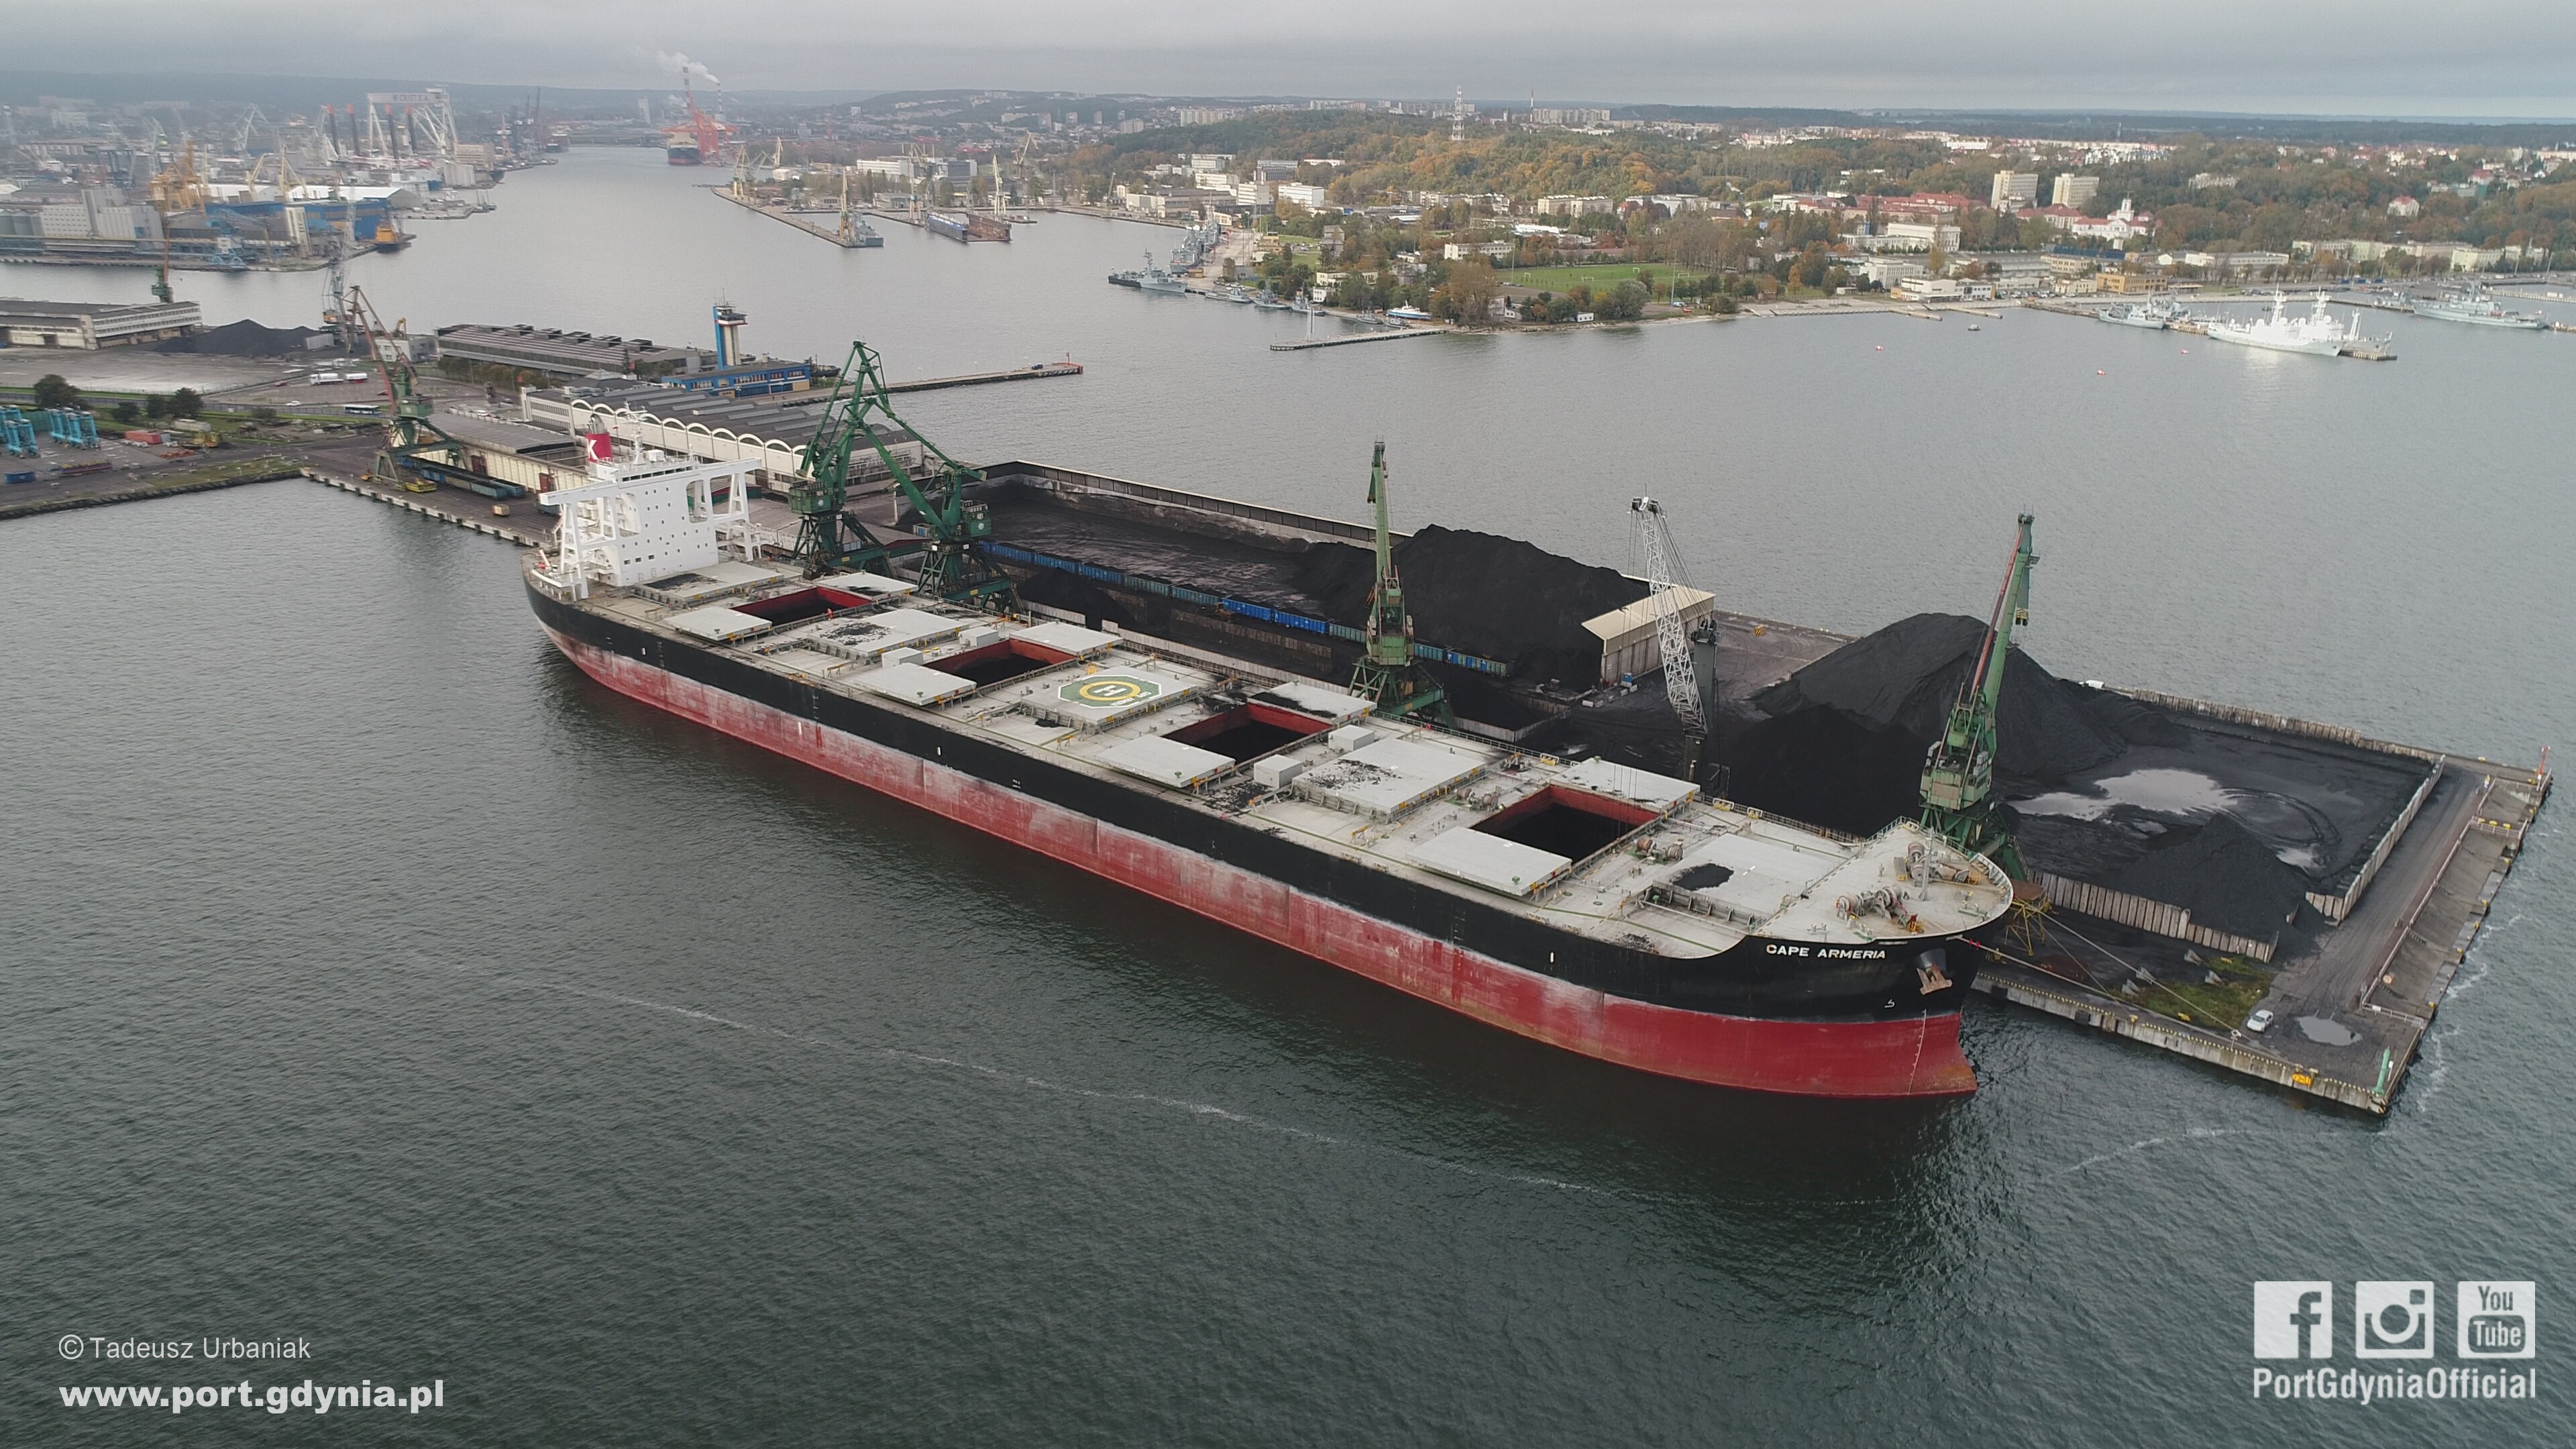 Coal from Australia arrives once again at the Port of Gdynia - MarinePoland.com